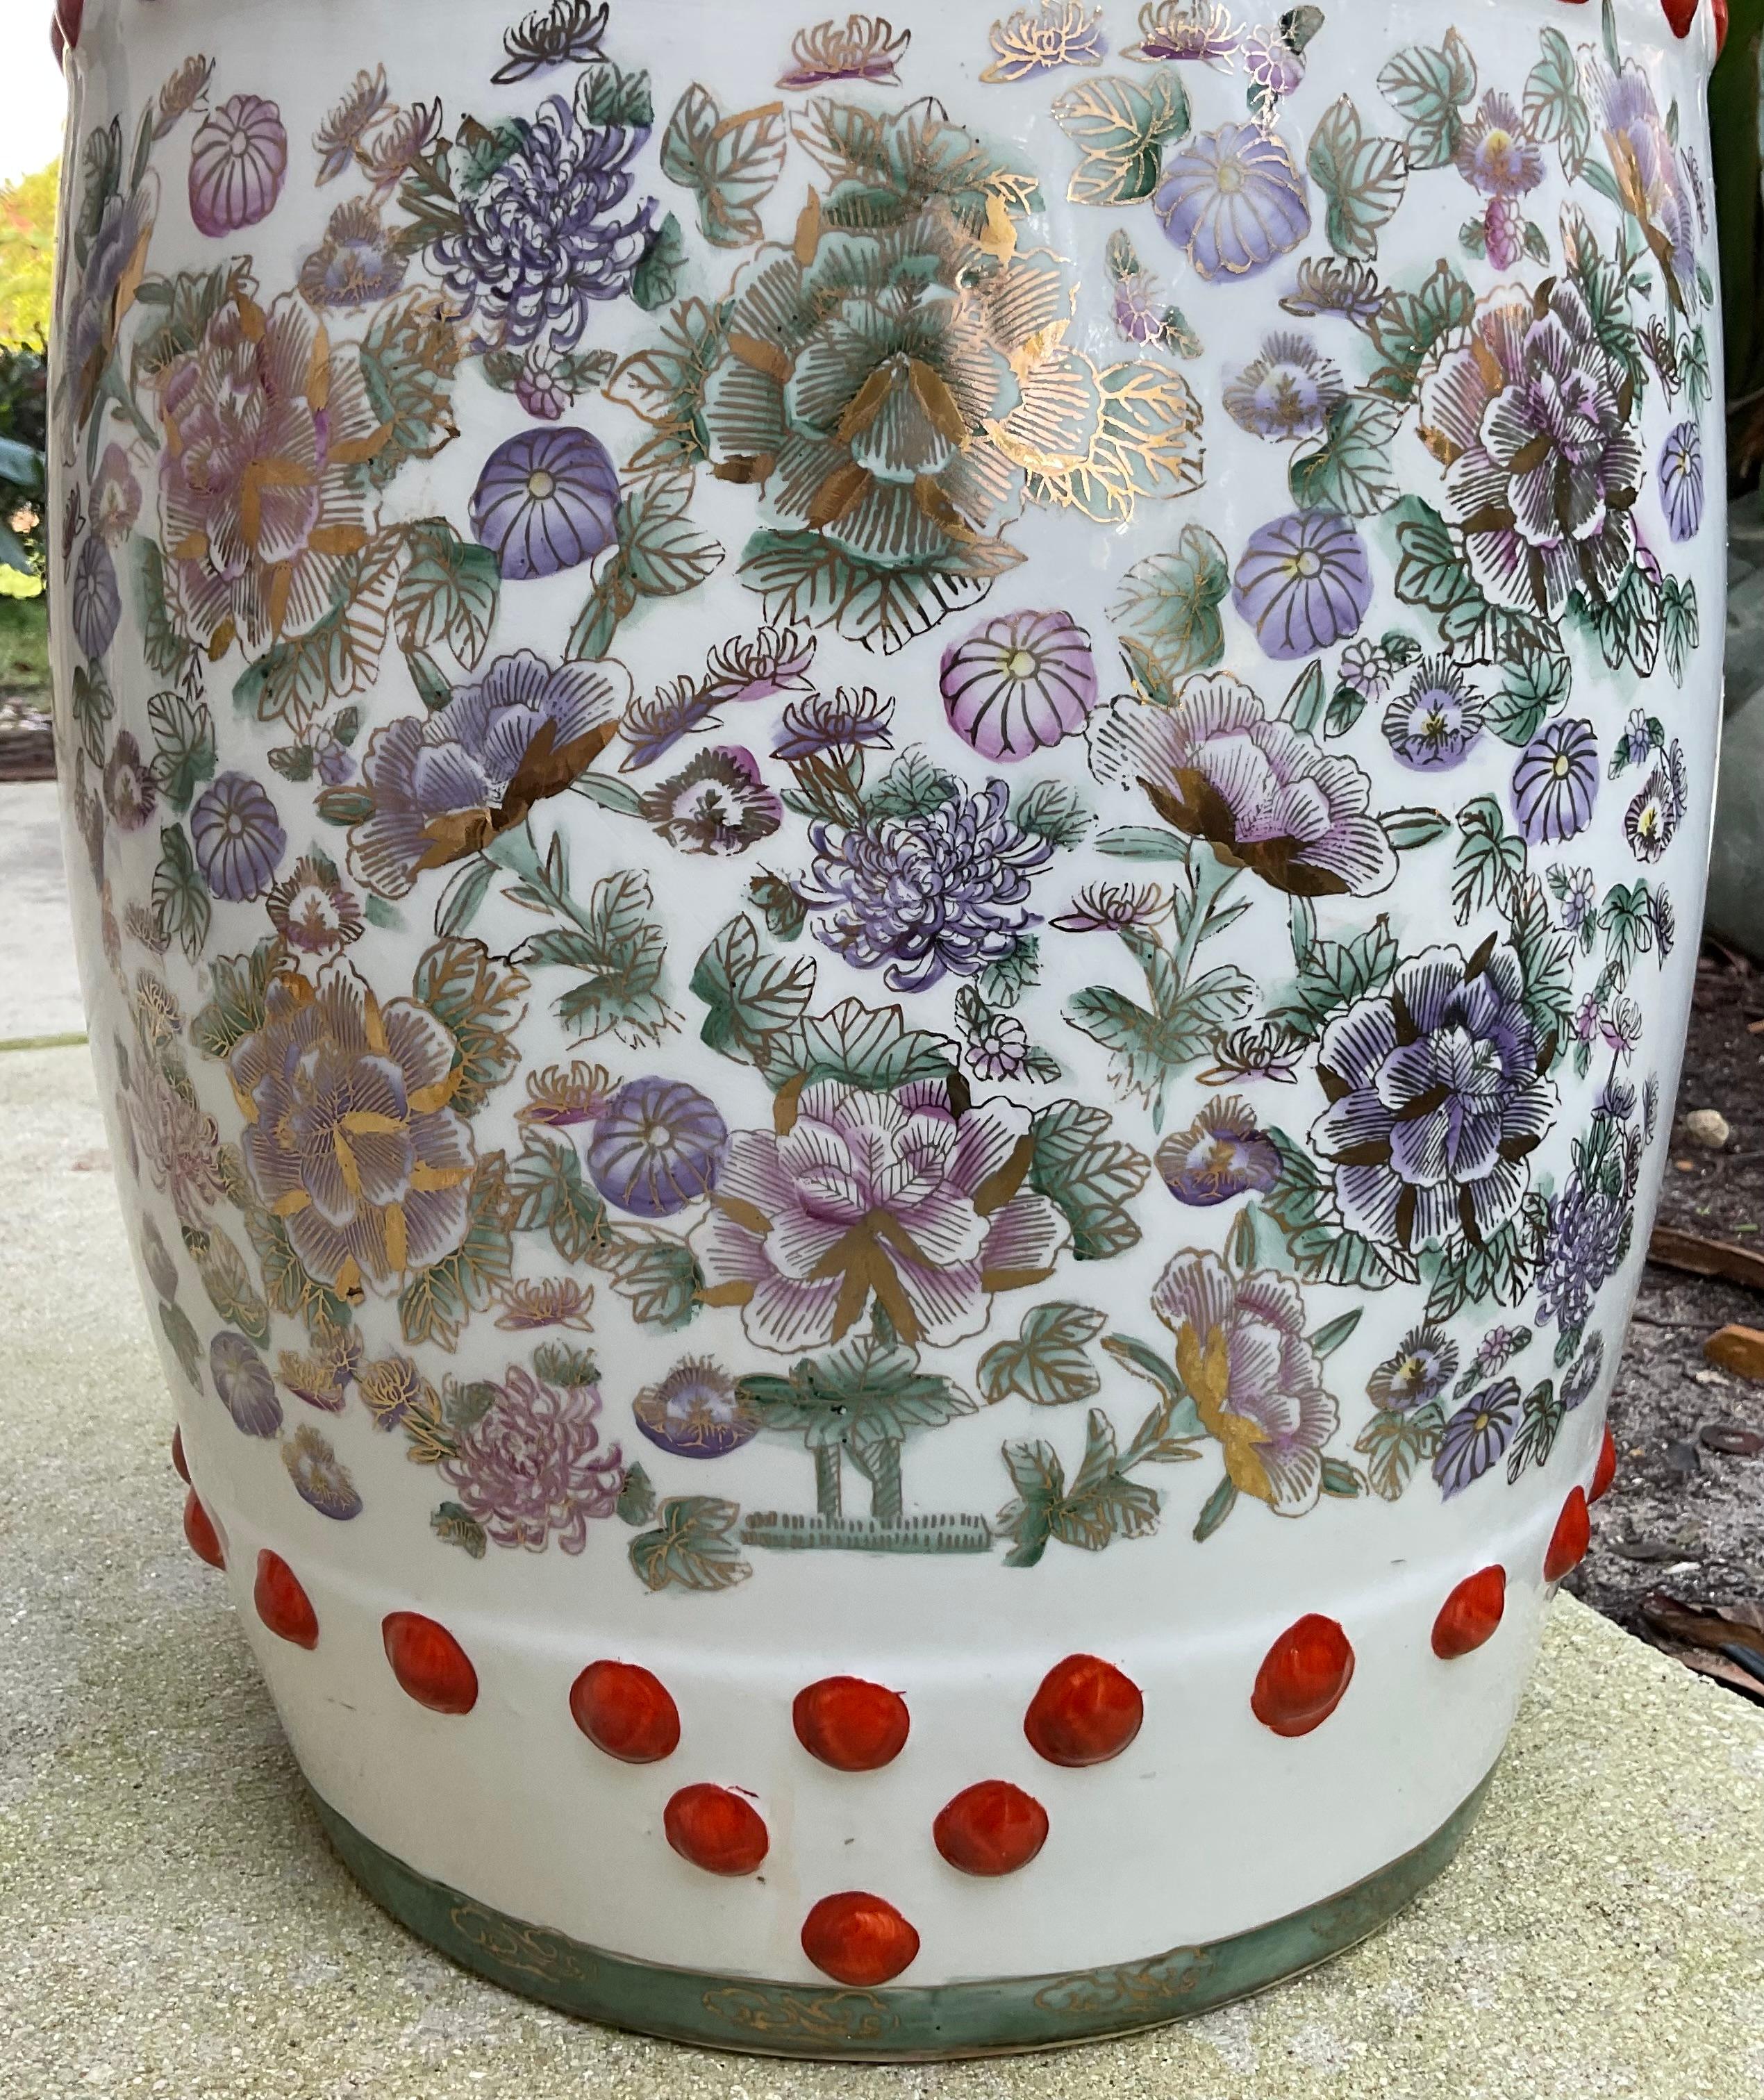 Vintage Chinese Ceramic Garden Stool In Good Condition For Sale In Delray Beach, FL